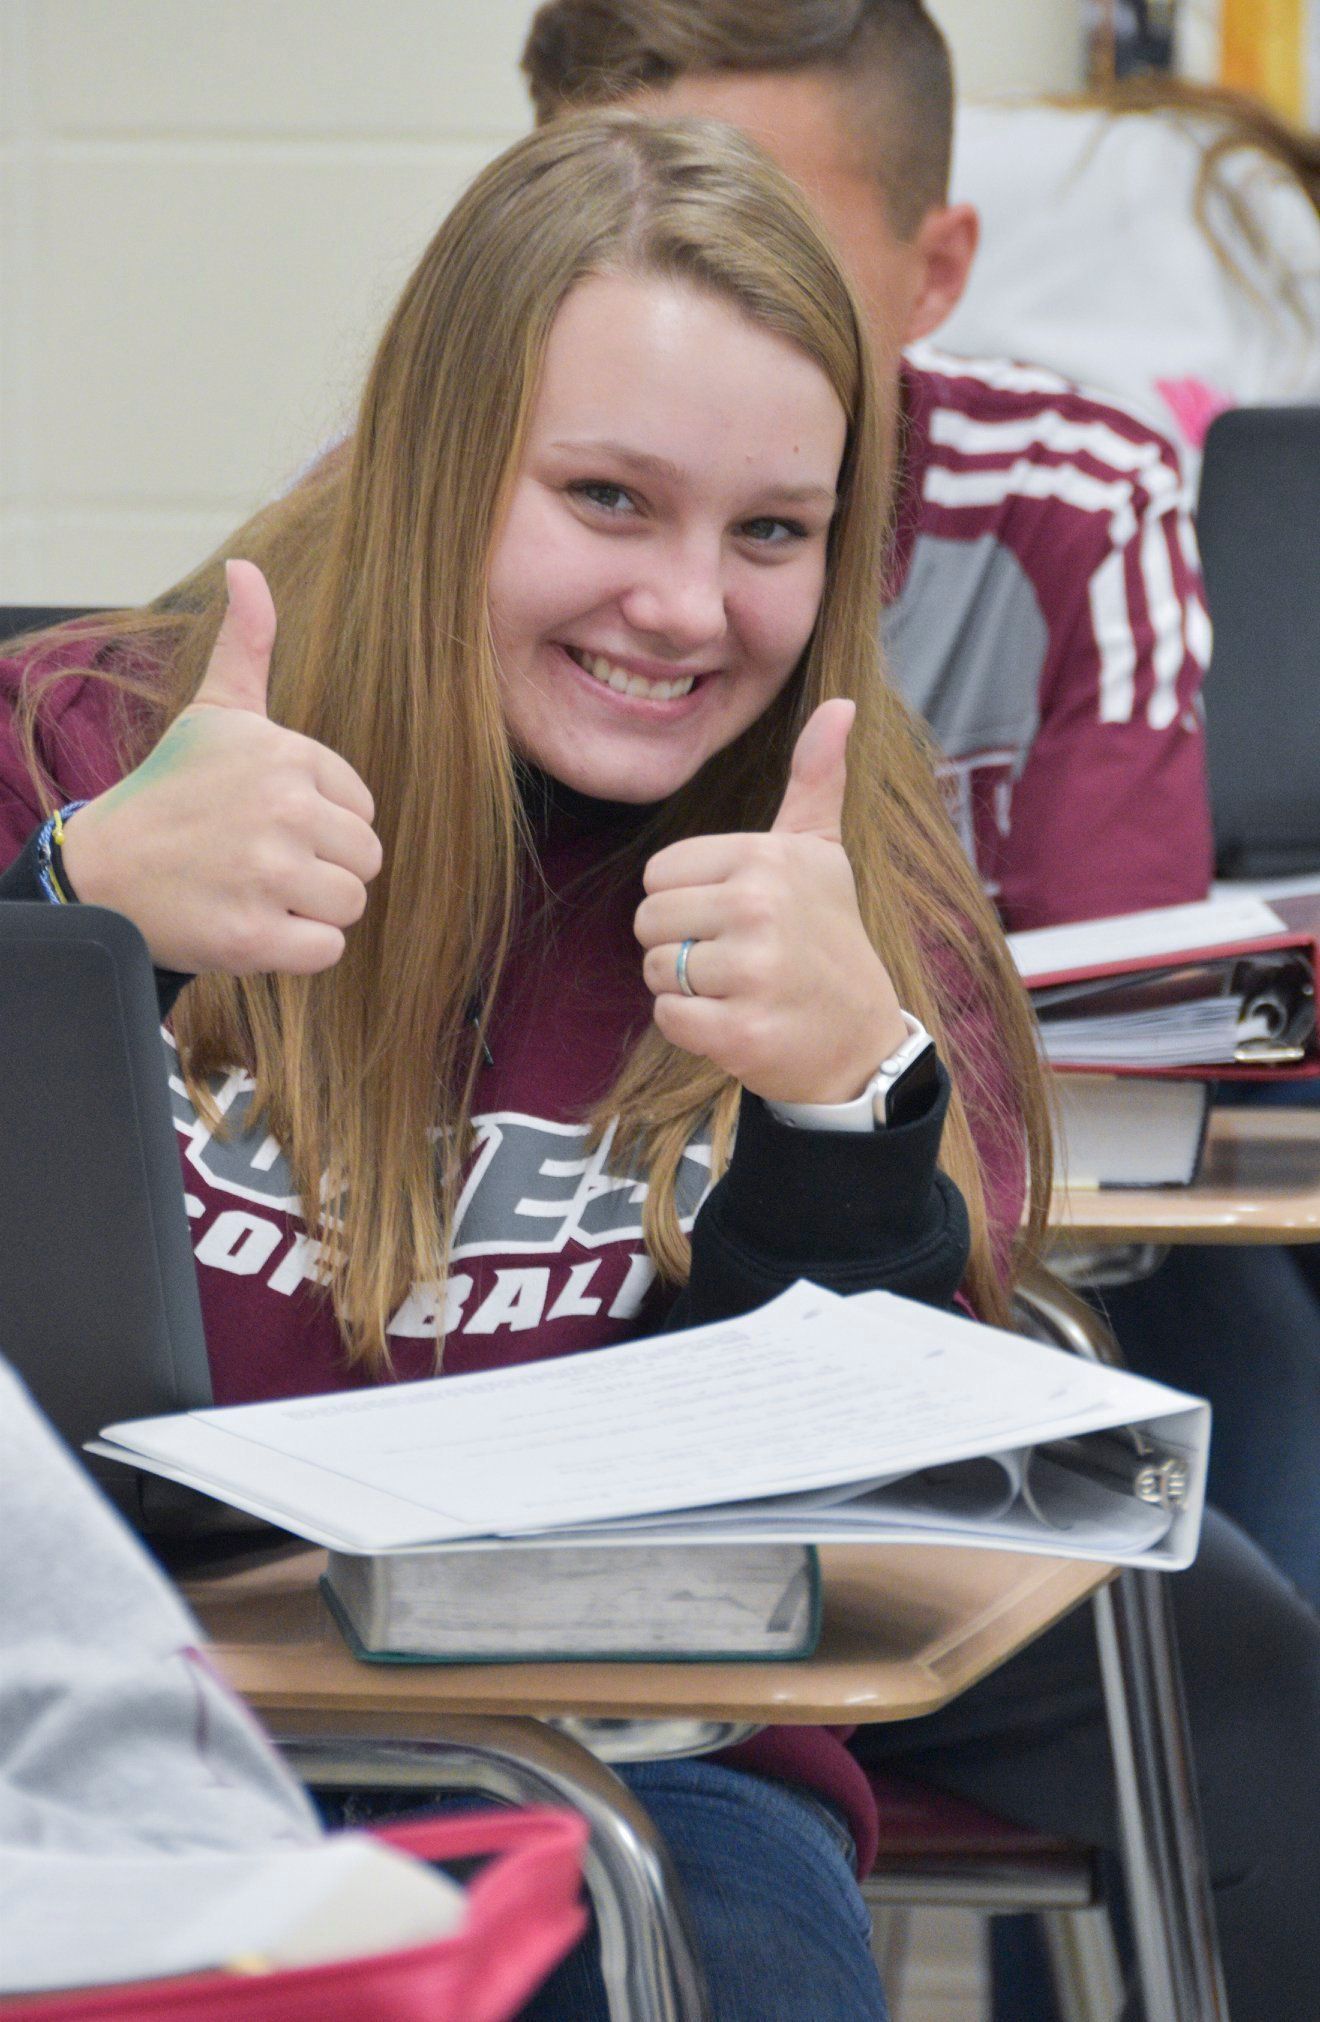 Smiling High School student at desk, giving a thumbs up